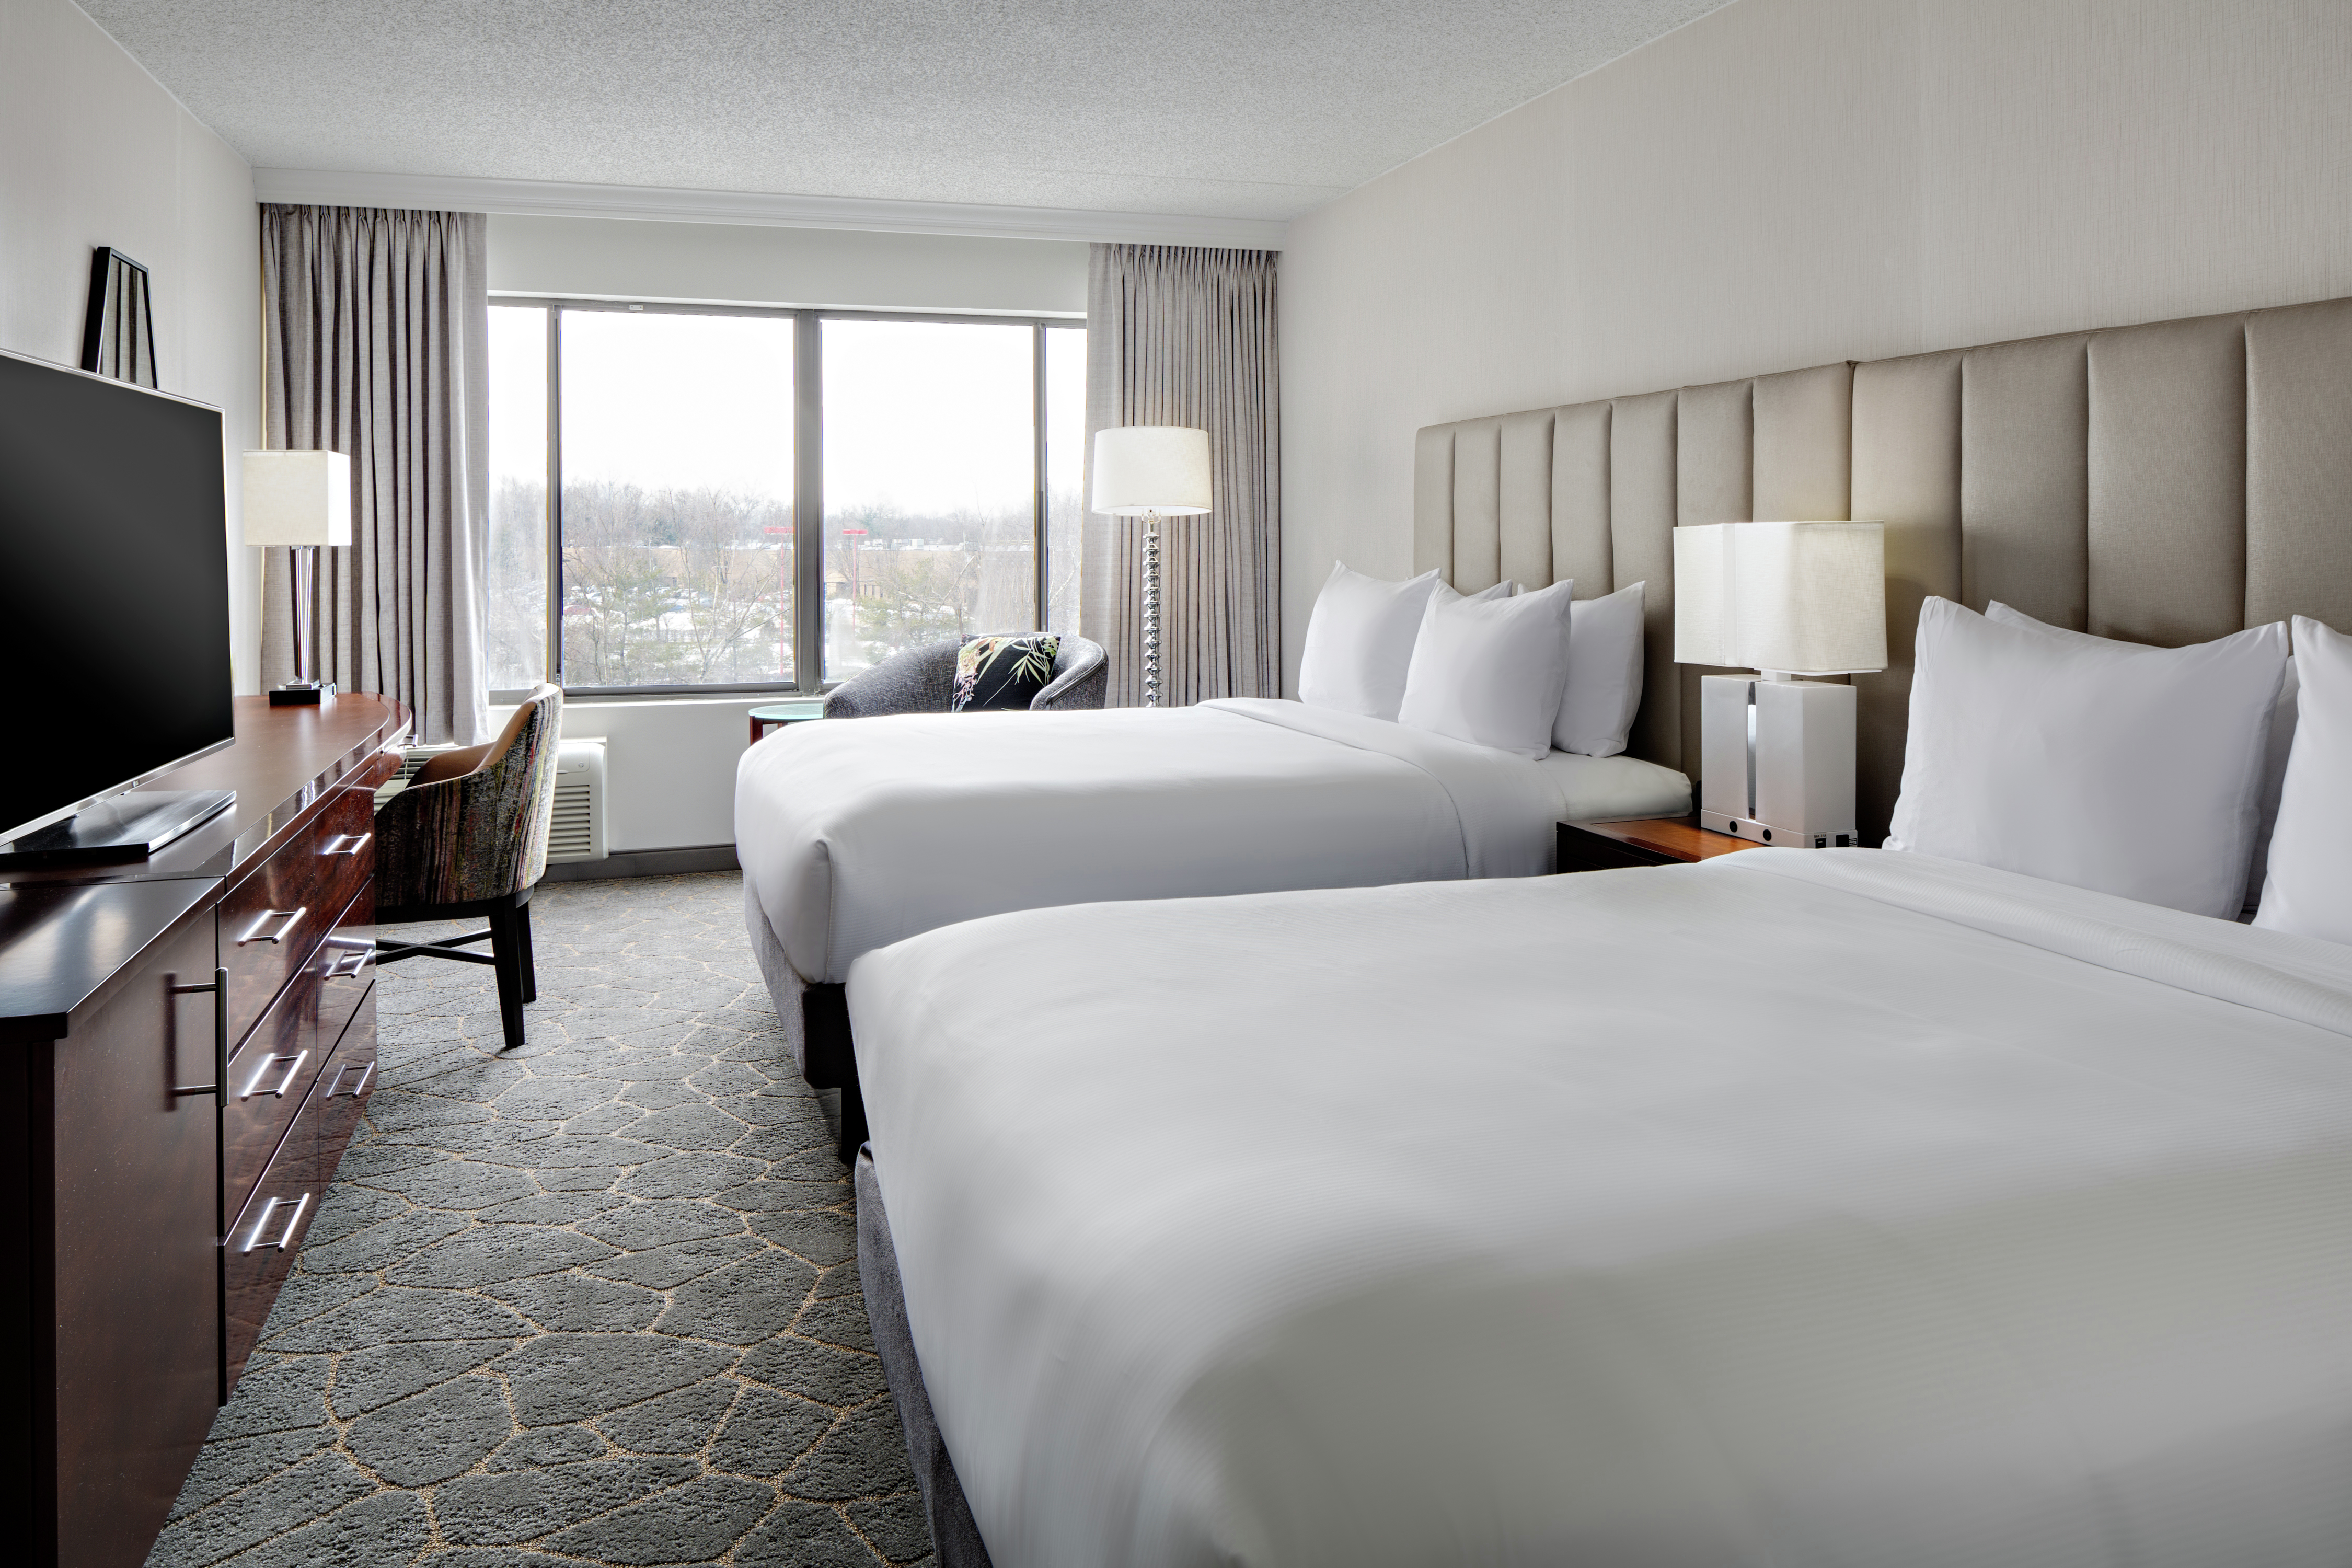 DoubleTree by Hilton Fairfield Hotel & Suites-Fairfield Updated 2023 Room  Price-Reviews & Deals | Trip.com